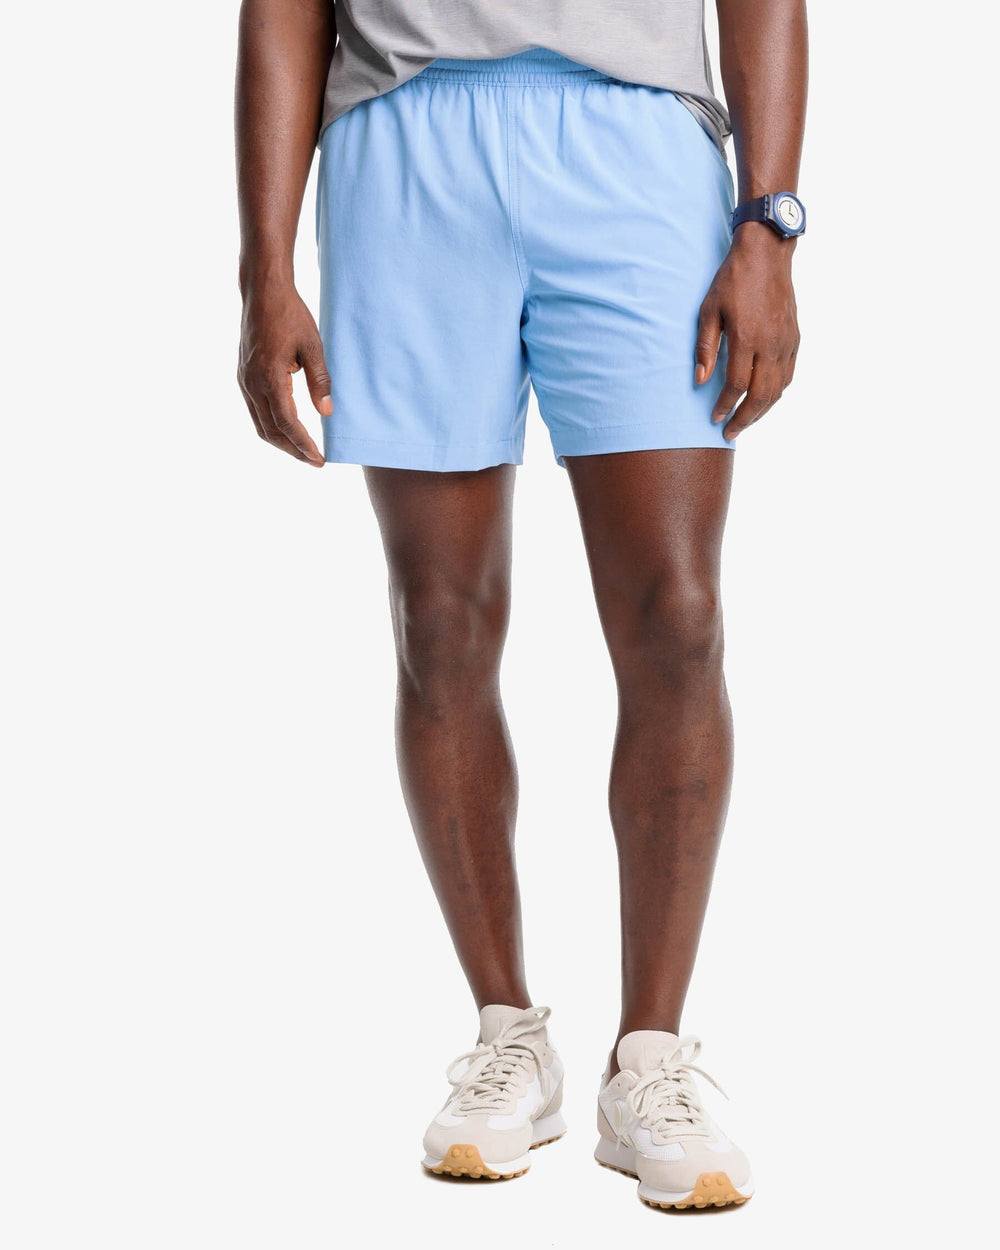 The model front view of the Men's Rip Channel 6 Inch Performance Short by Southern Tide - Boat Blue